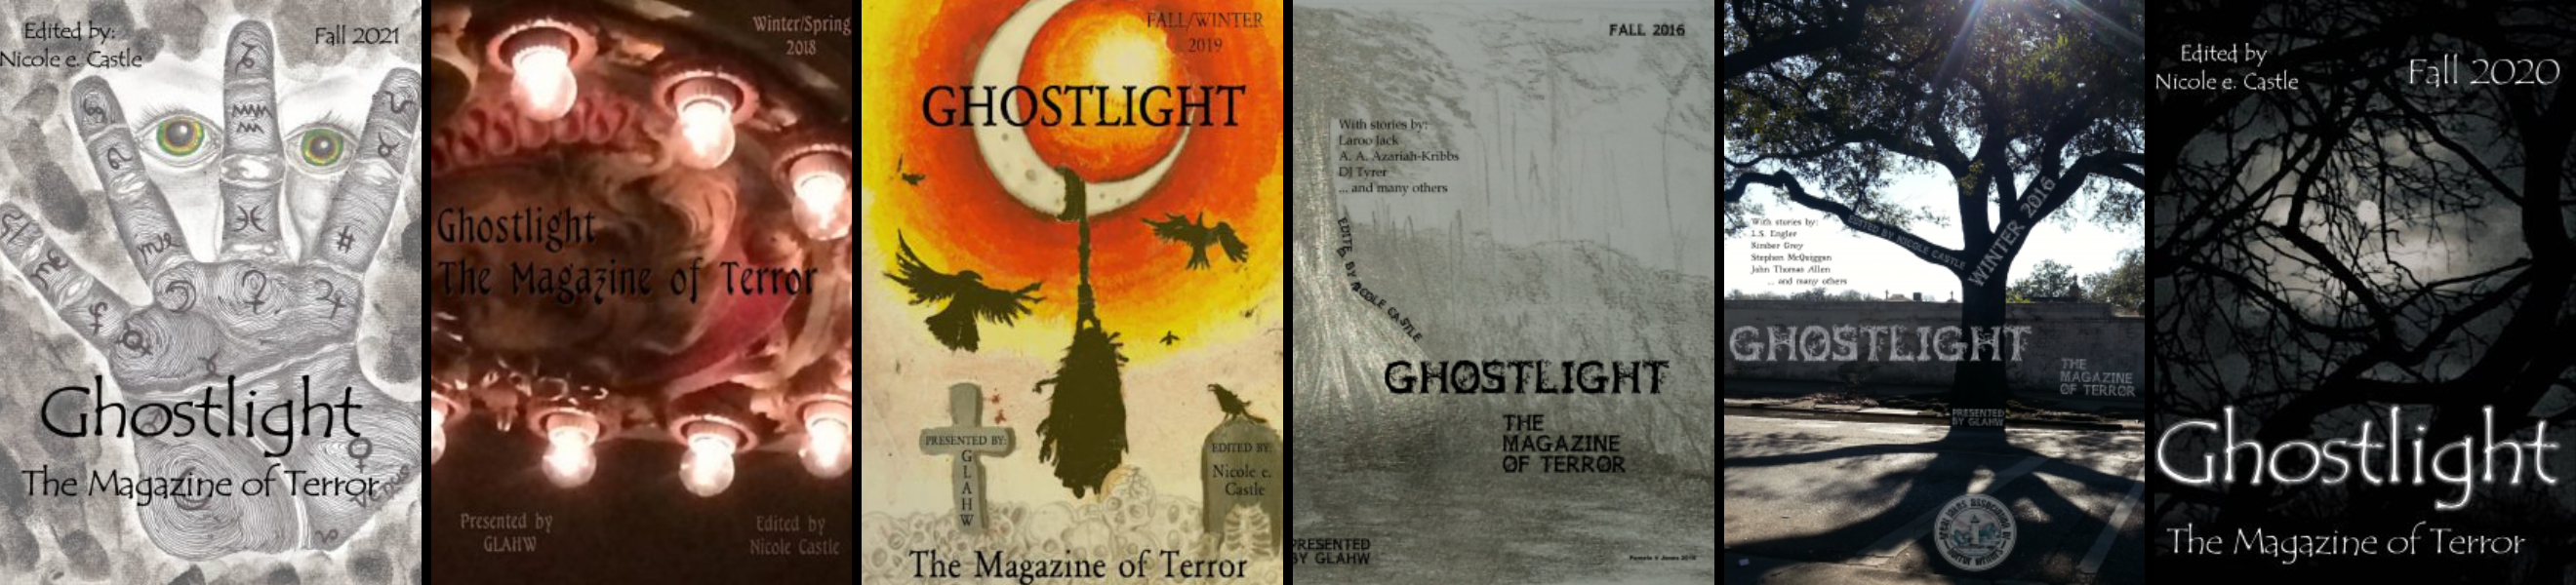 ghostlight collection of covers banner